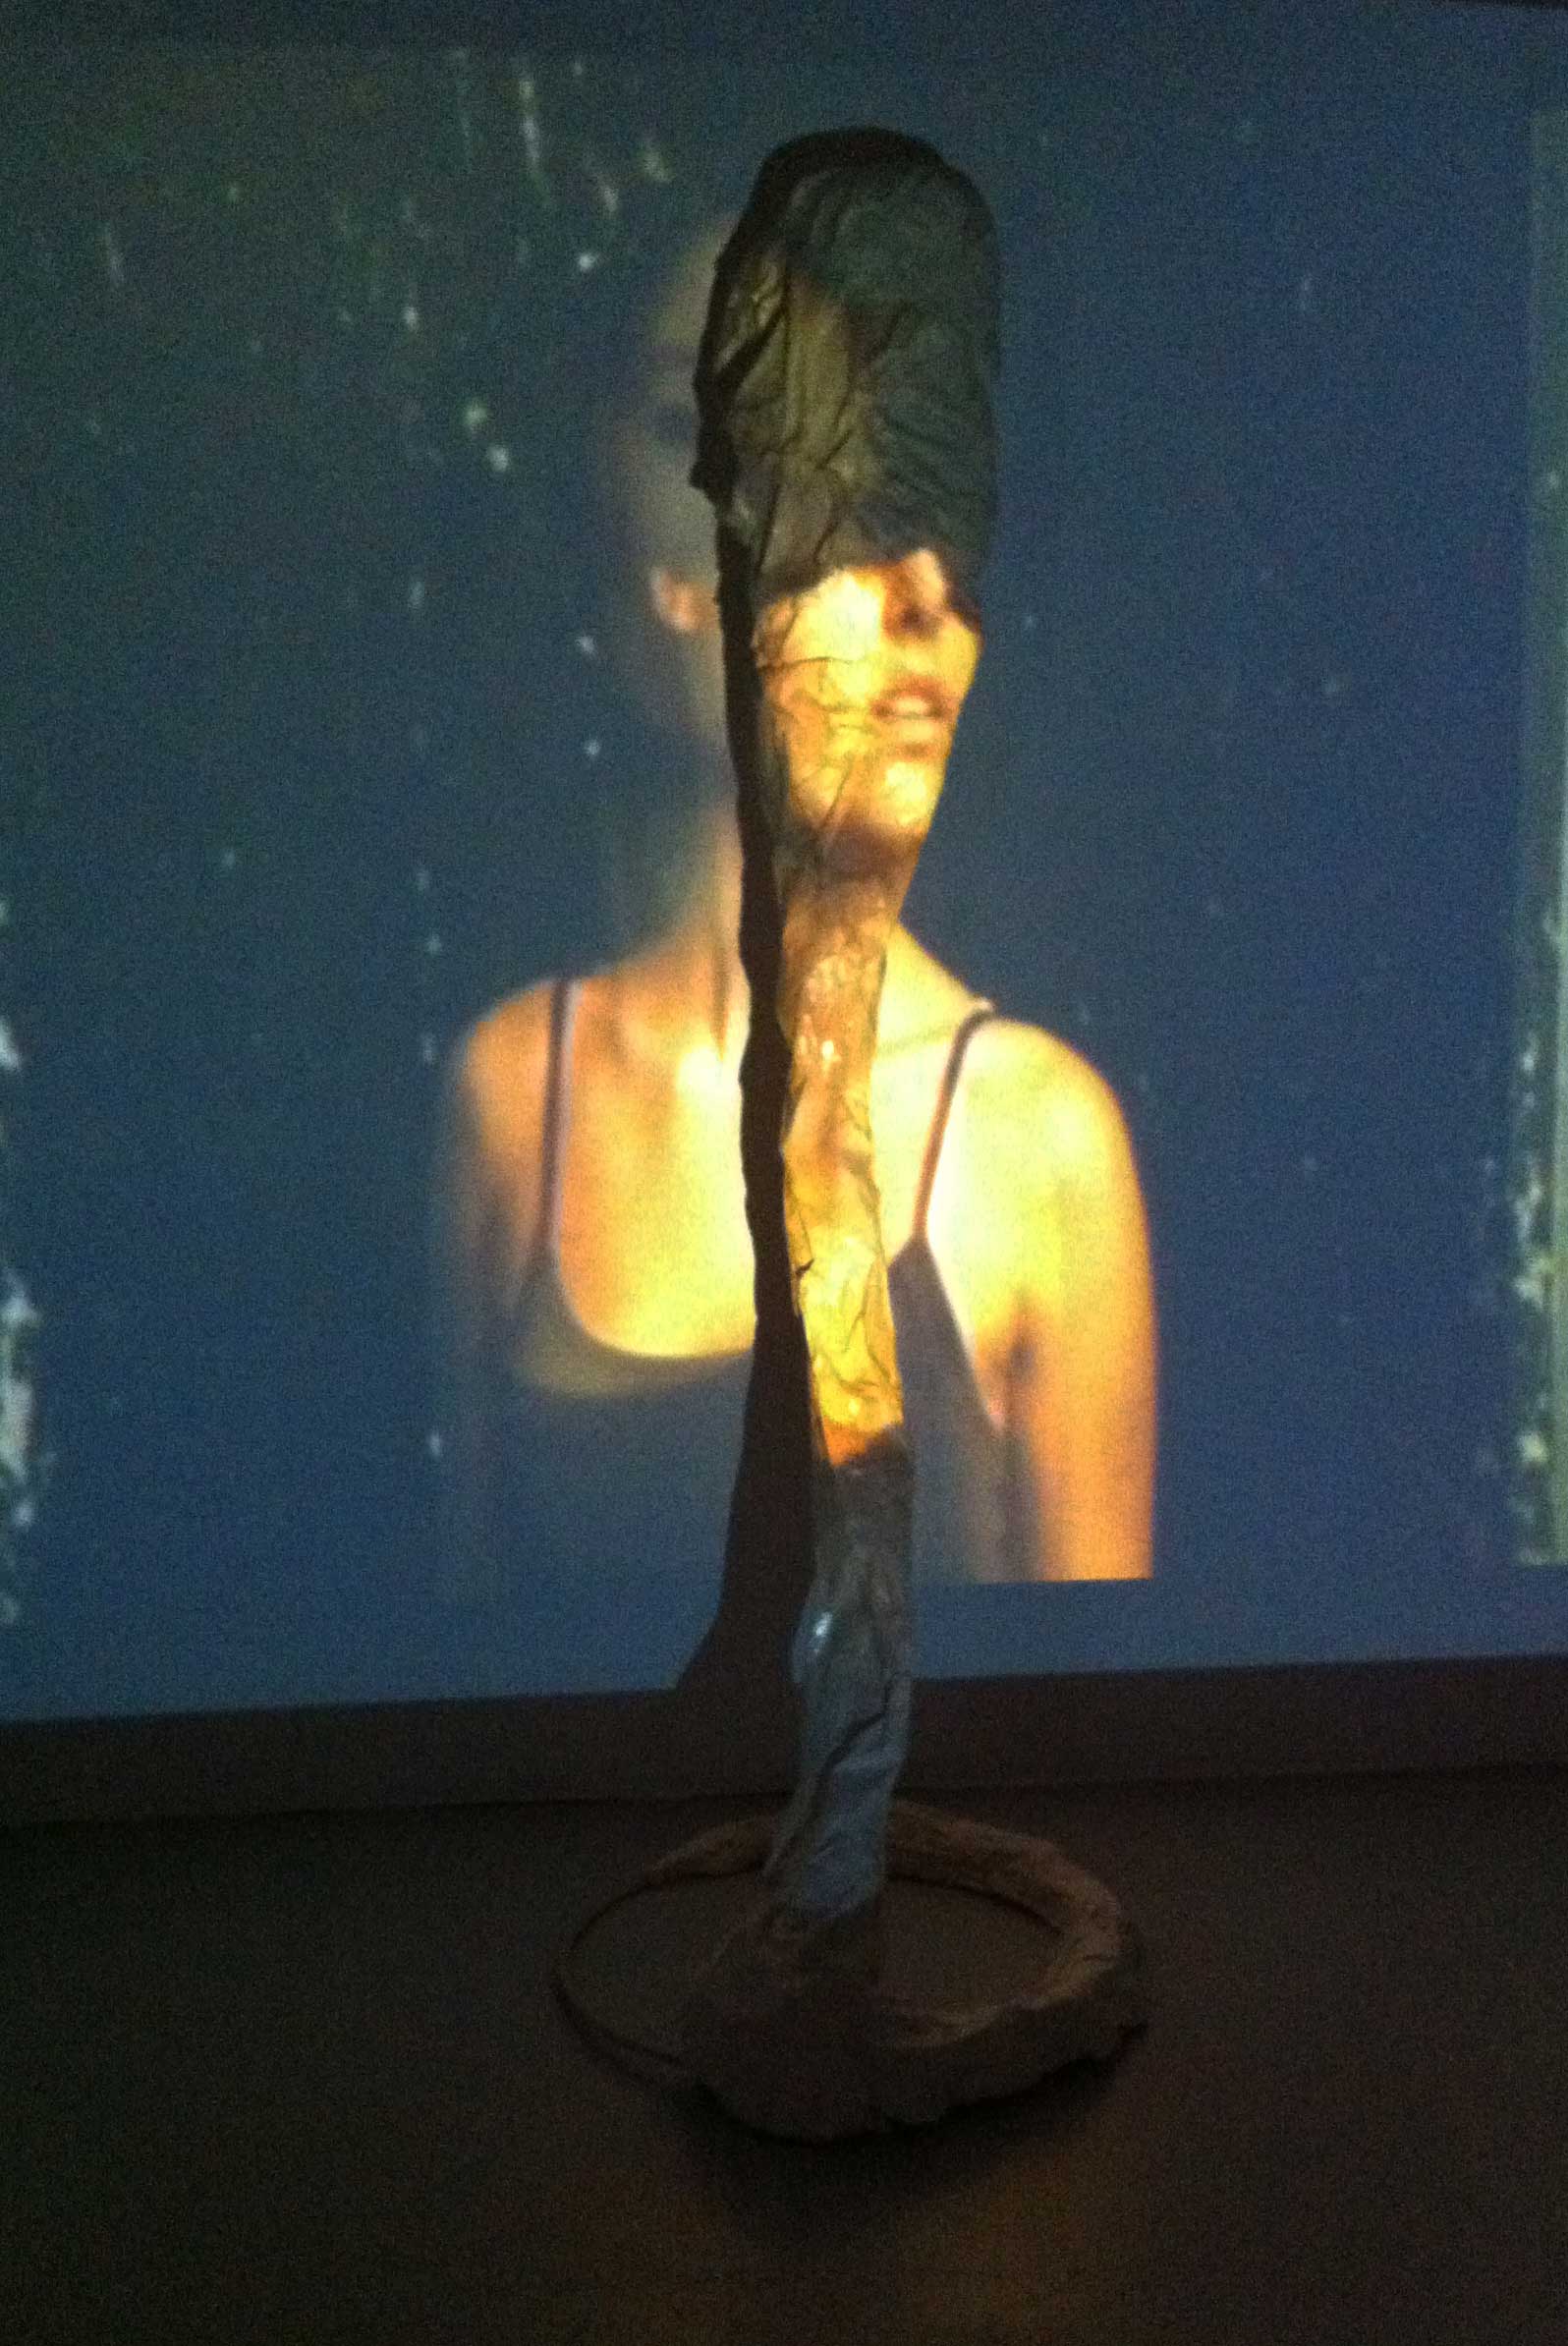 Shot-from-video-installation---Two-(1.06min).